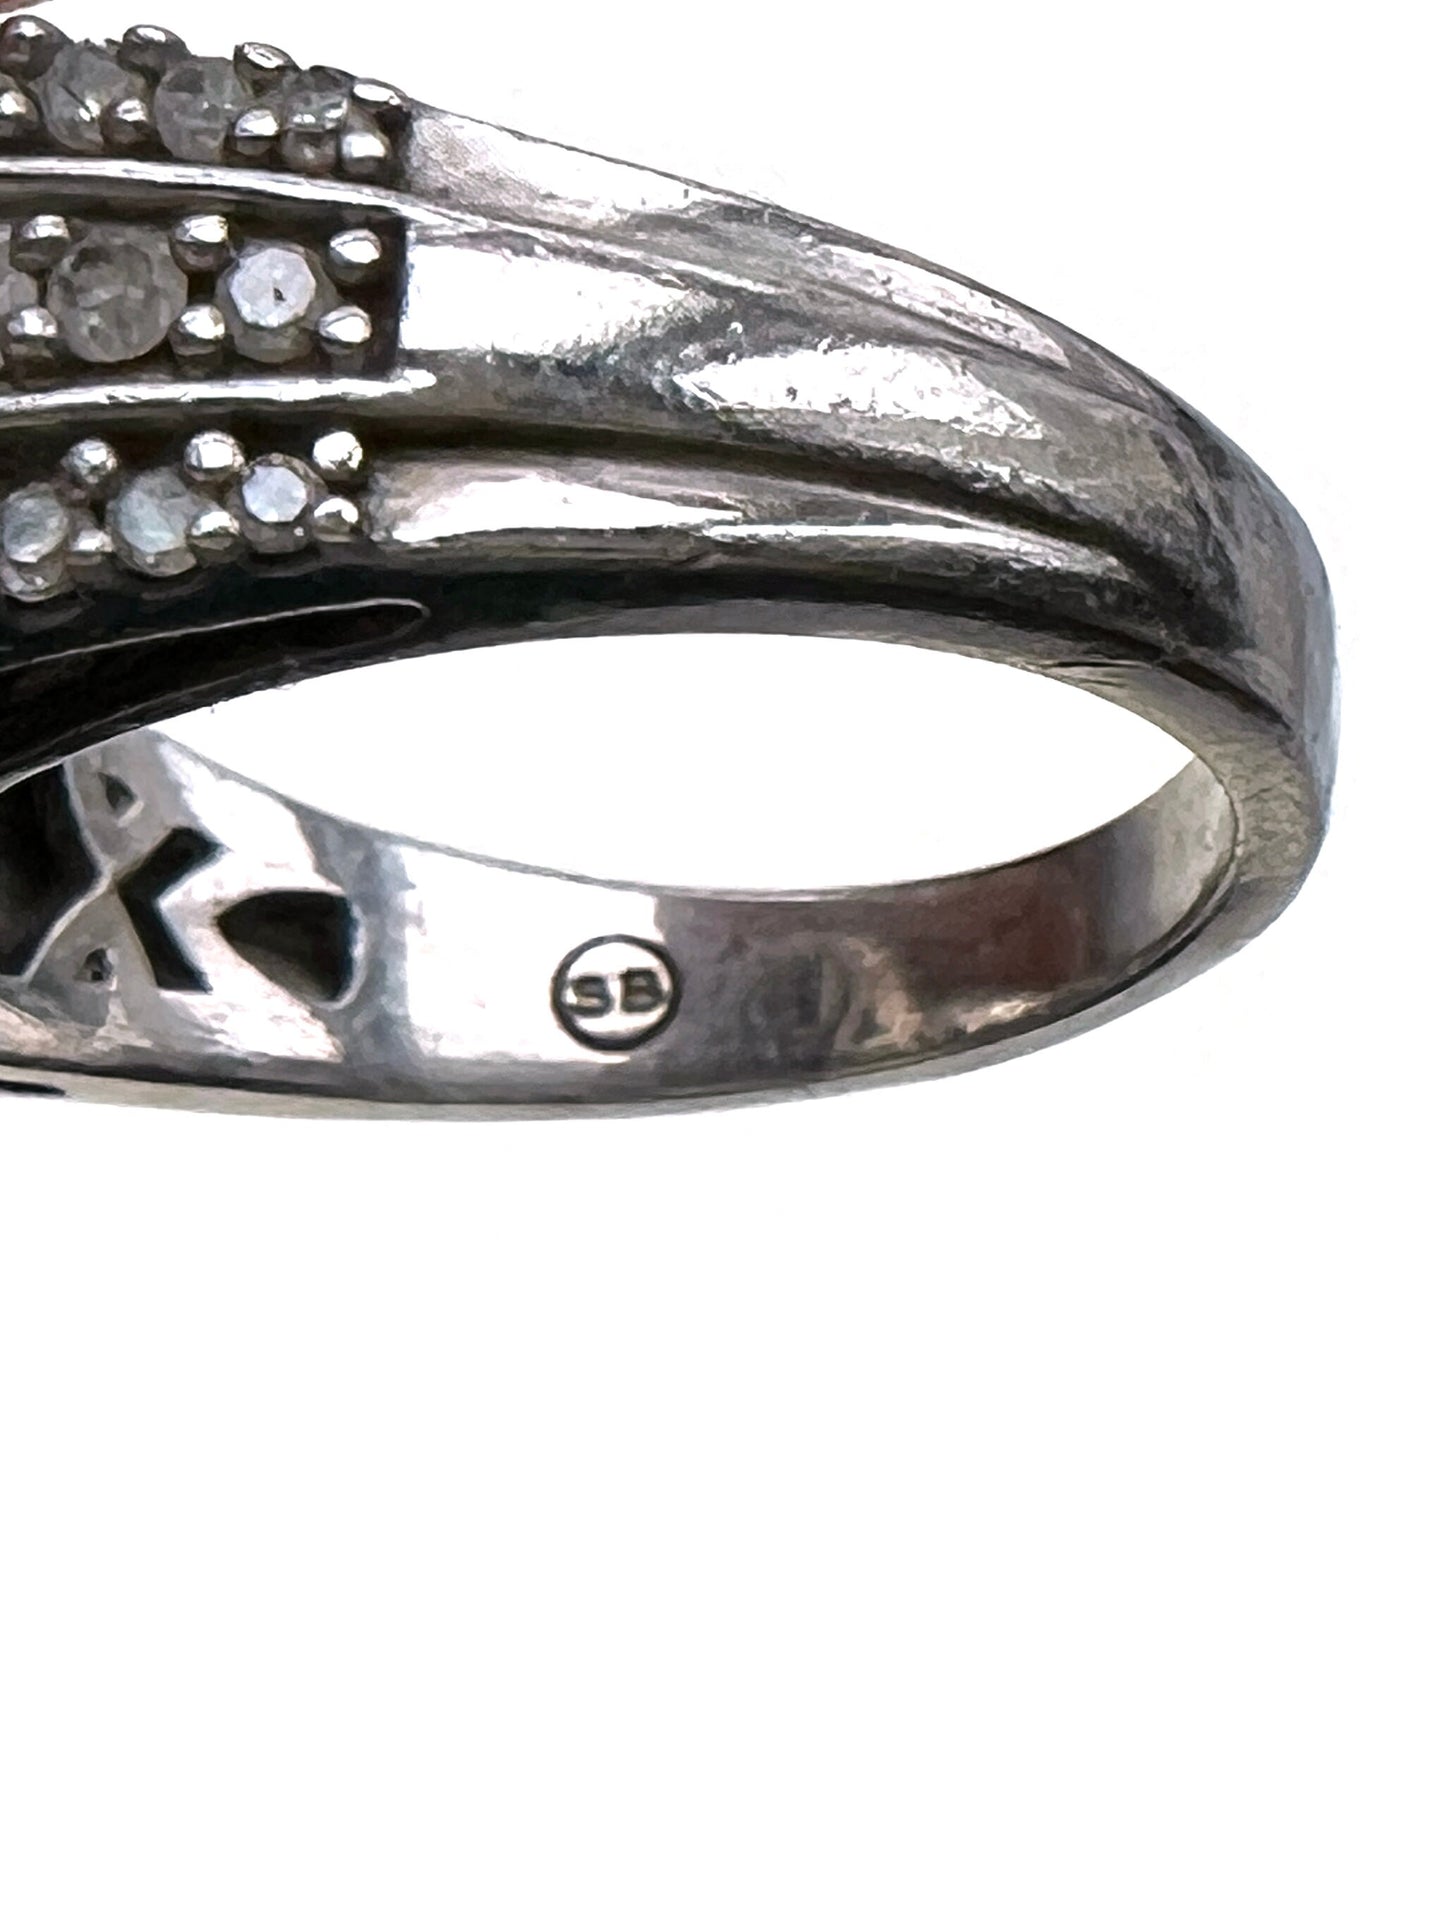 Vintage Paved Silver Diamond Cocktail Ring with Total Over 2 Carat Natural Diamonds, Circa 1970 from Germany